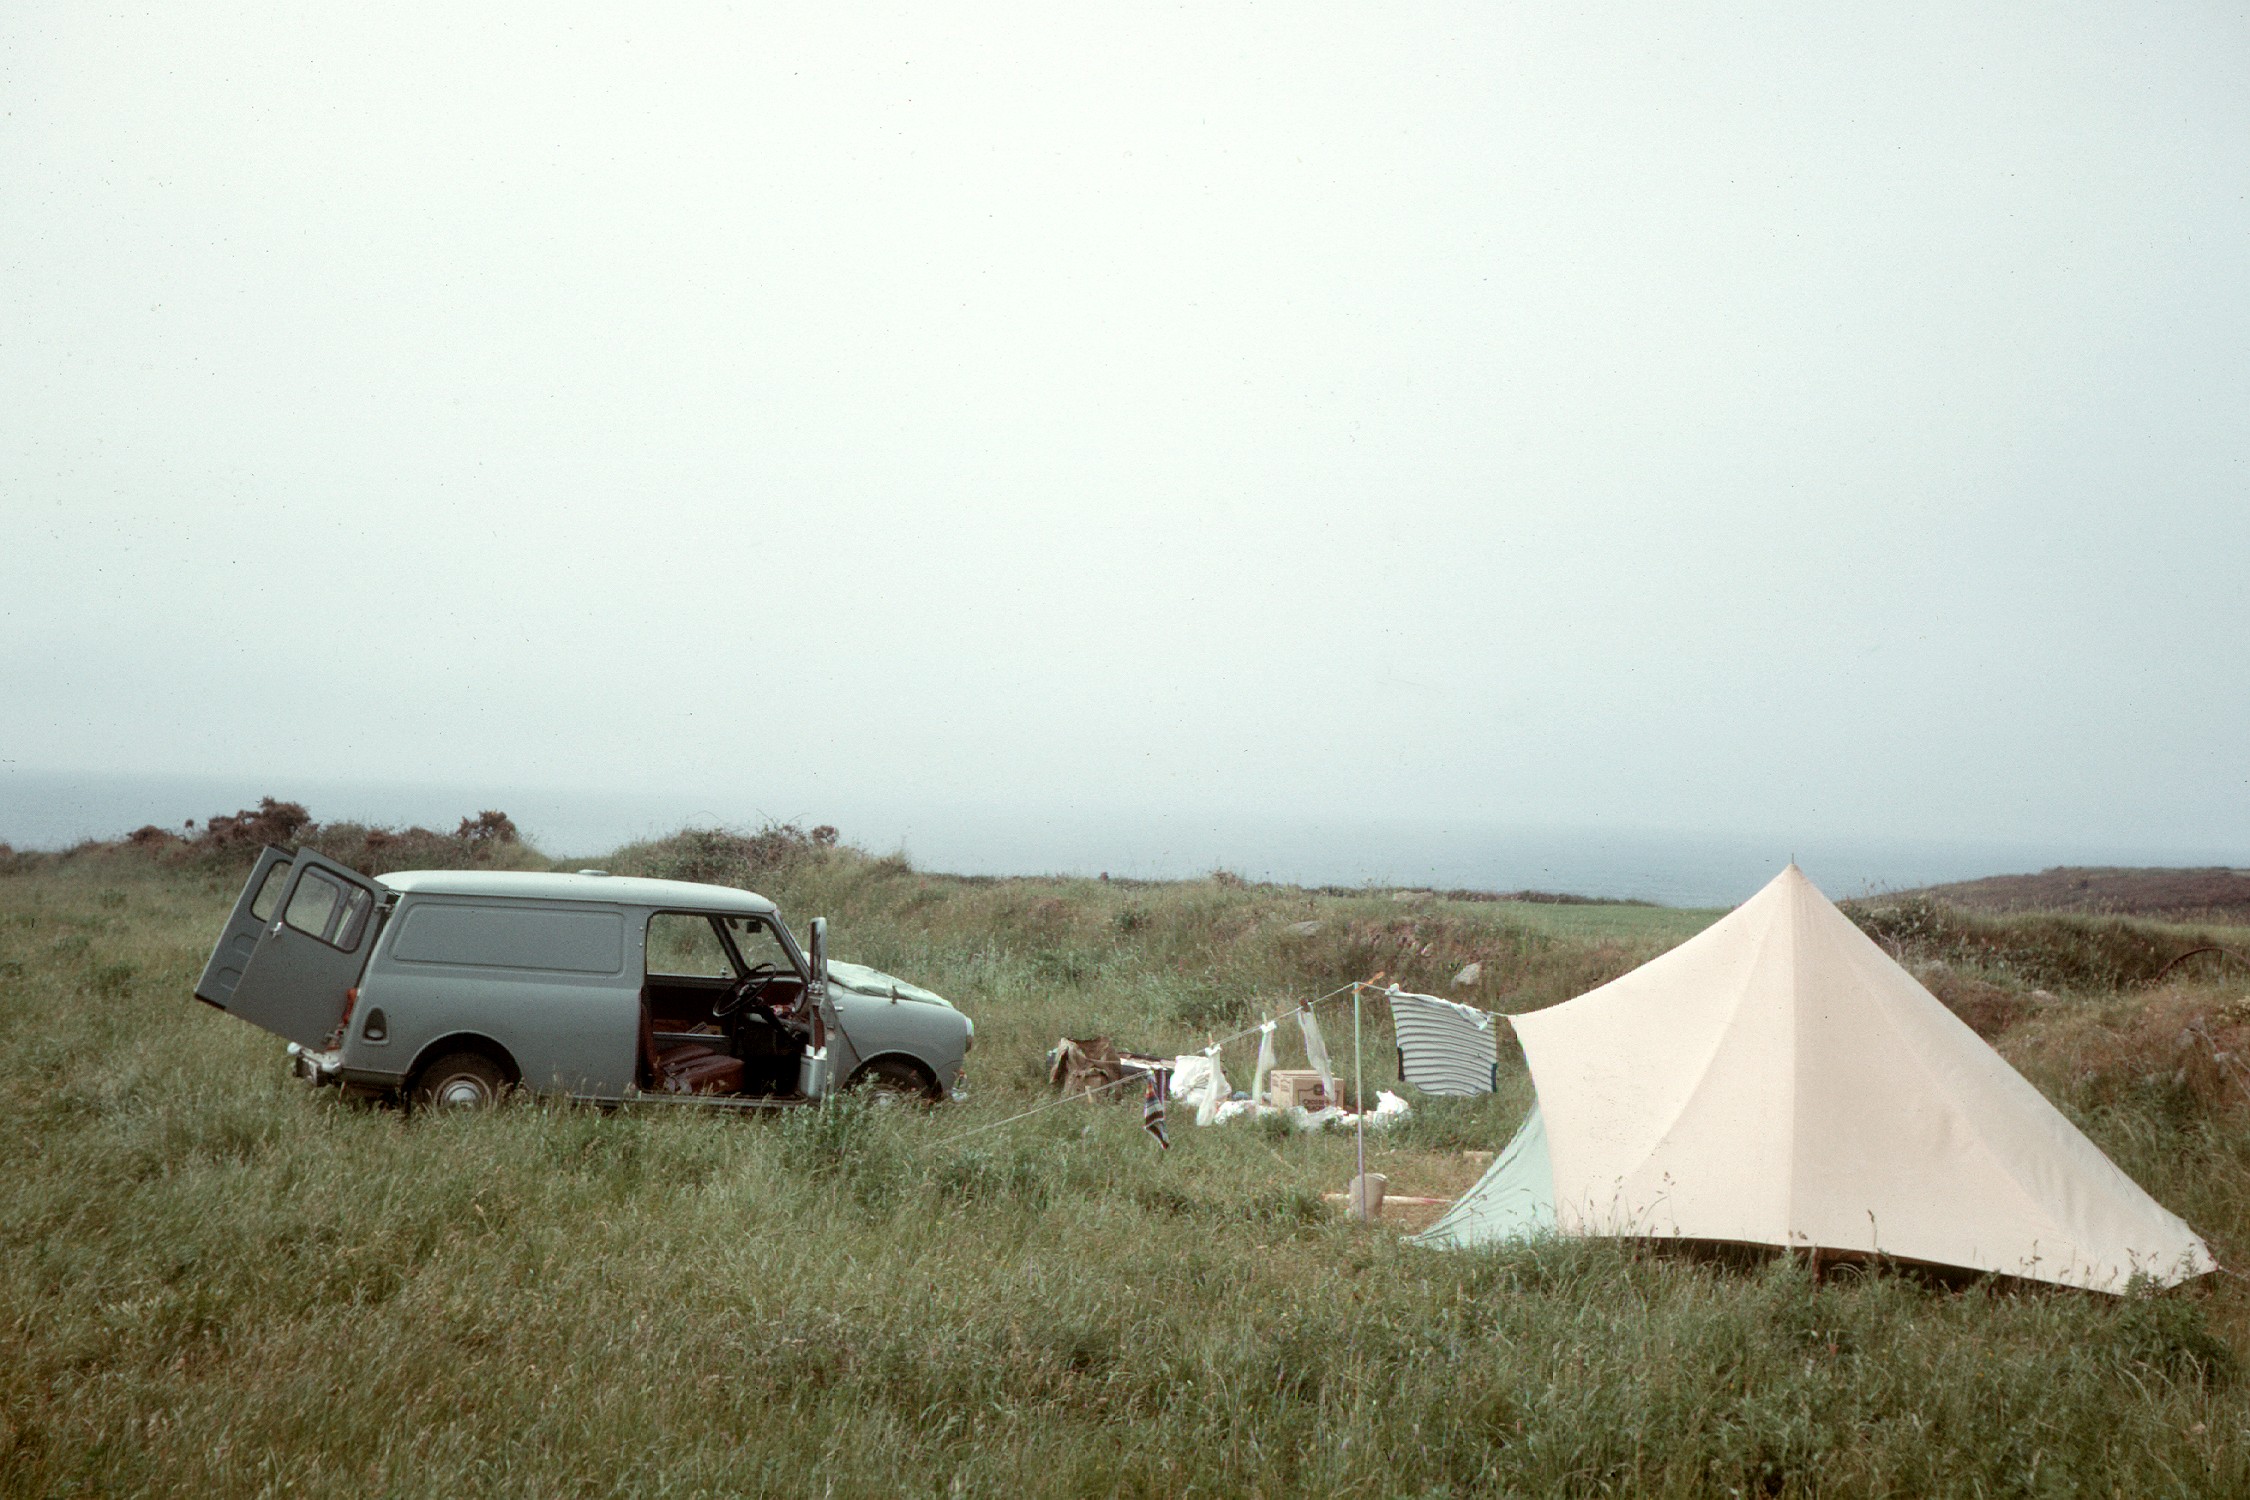 6300710s July 1963 - Our camp site at St Davids.